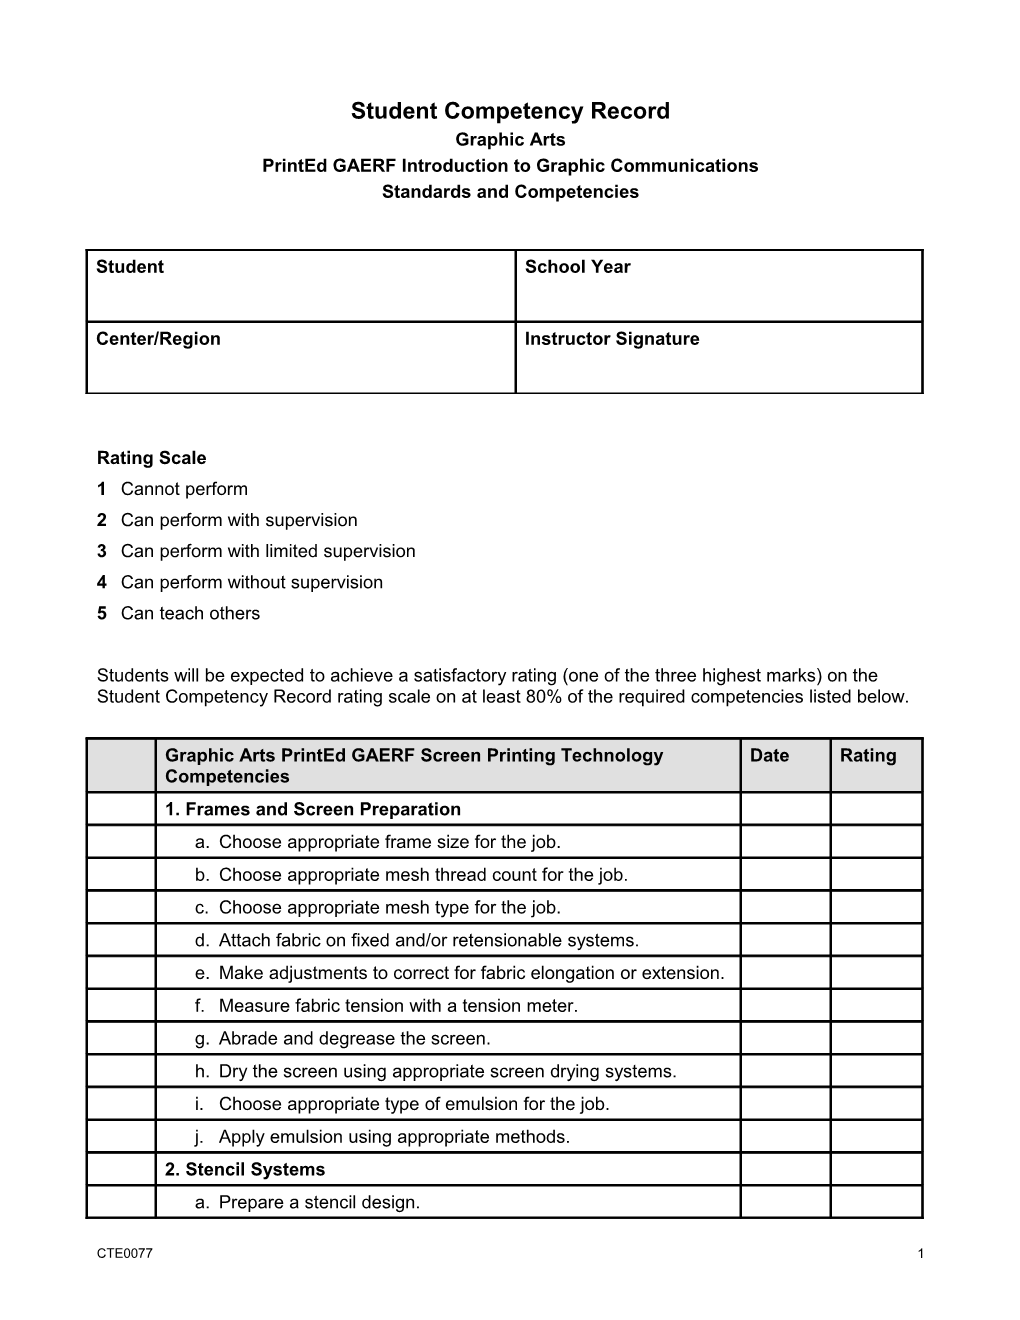 Student Competency Record